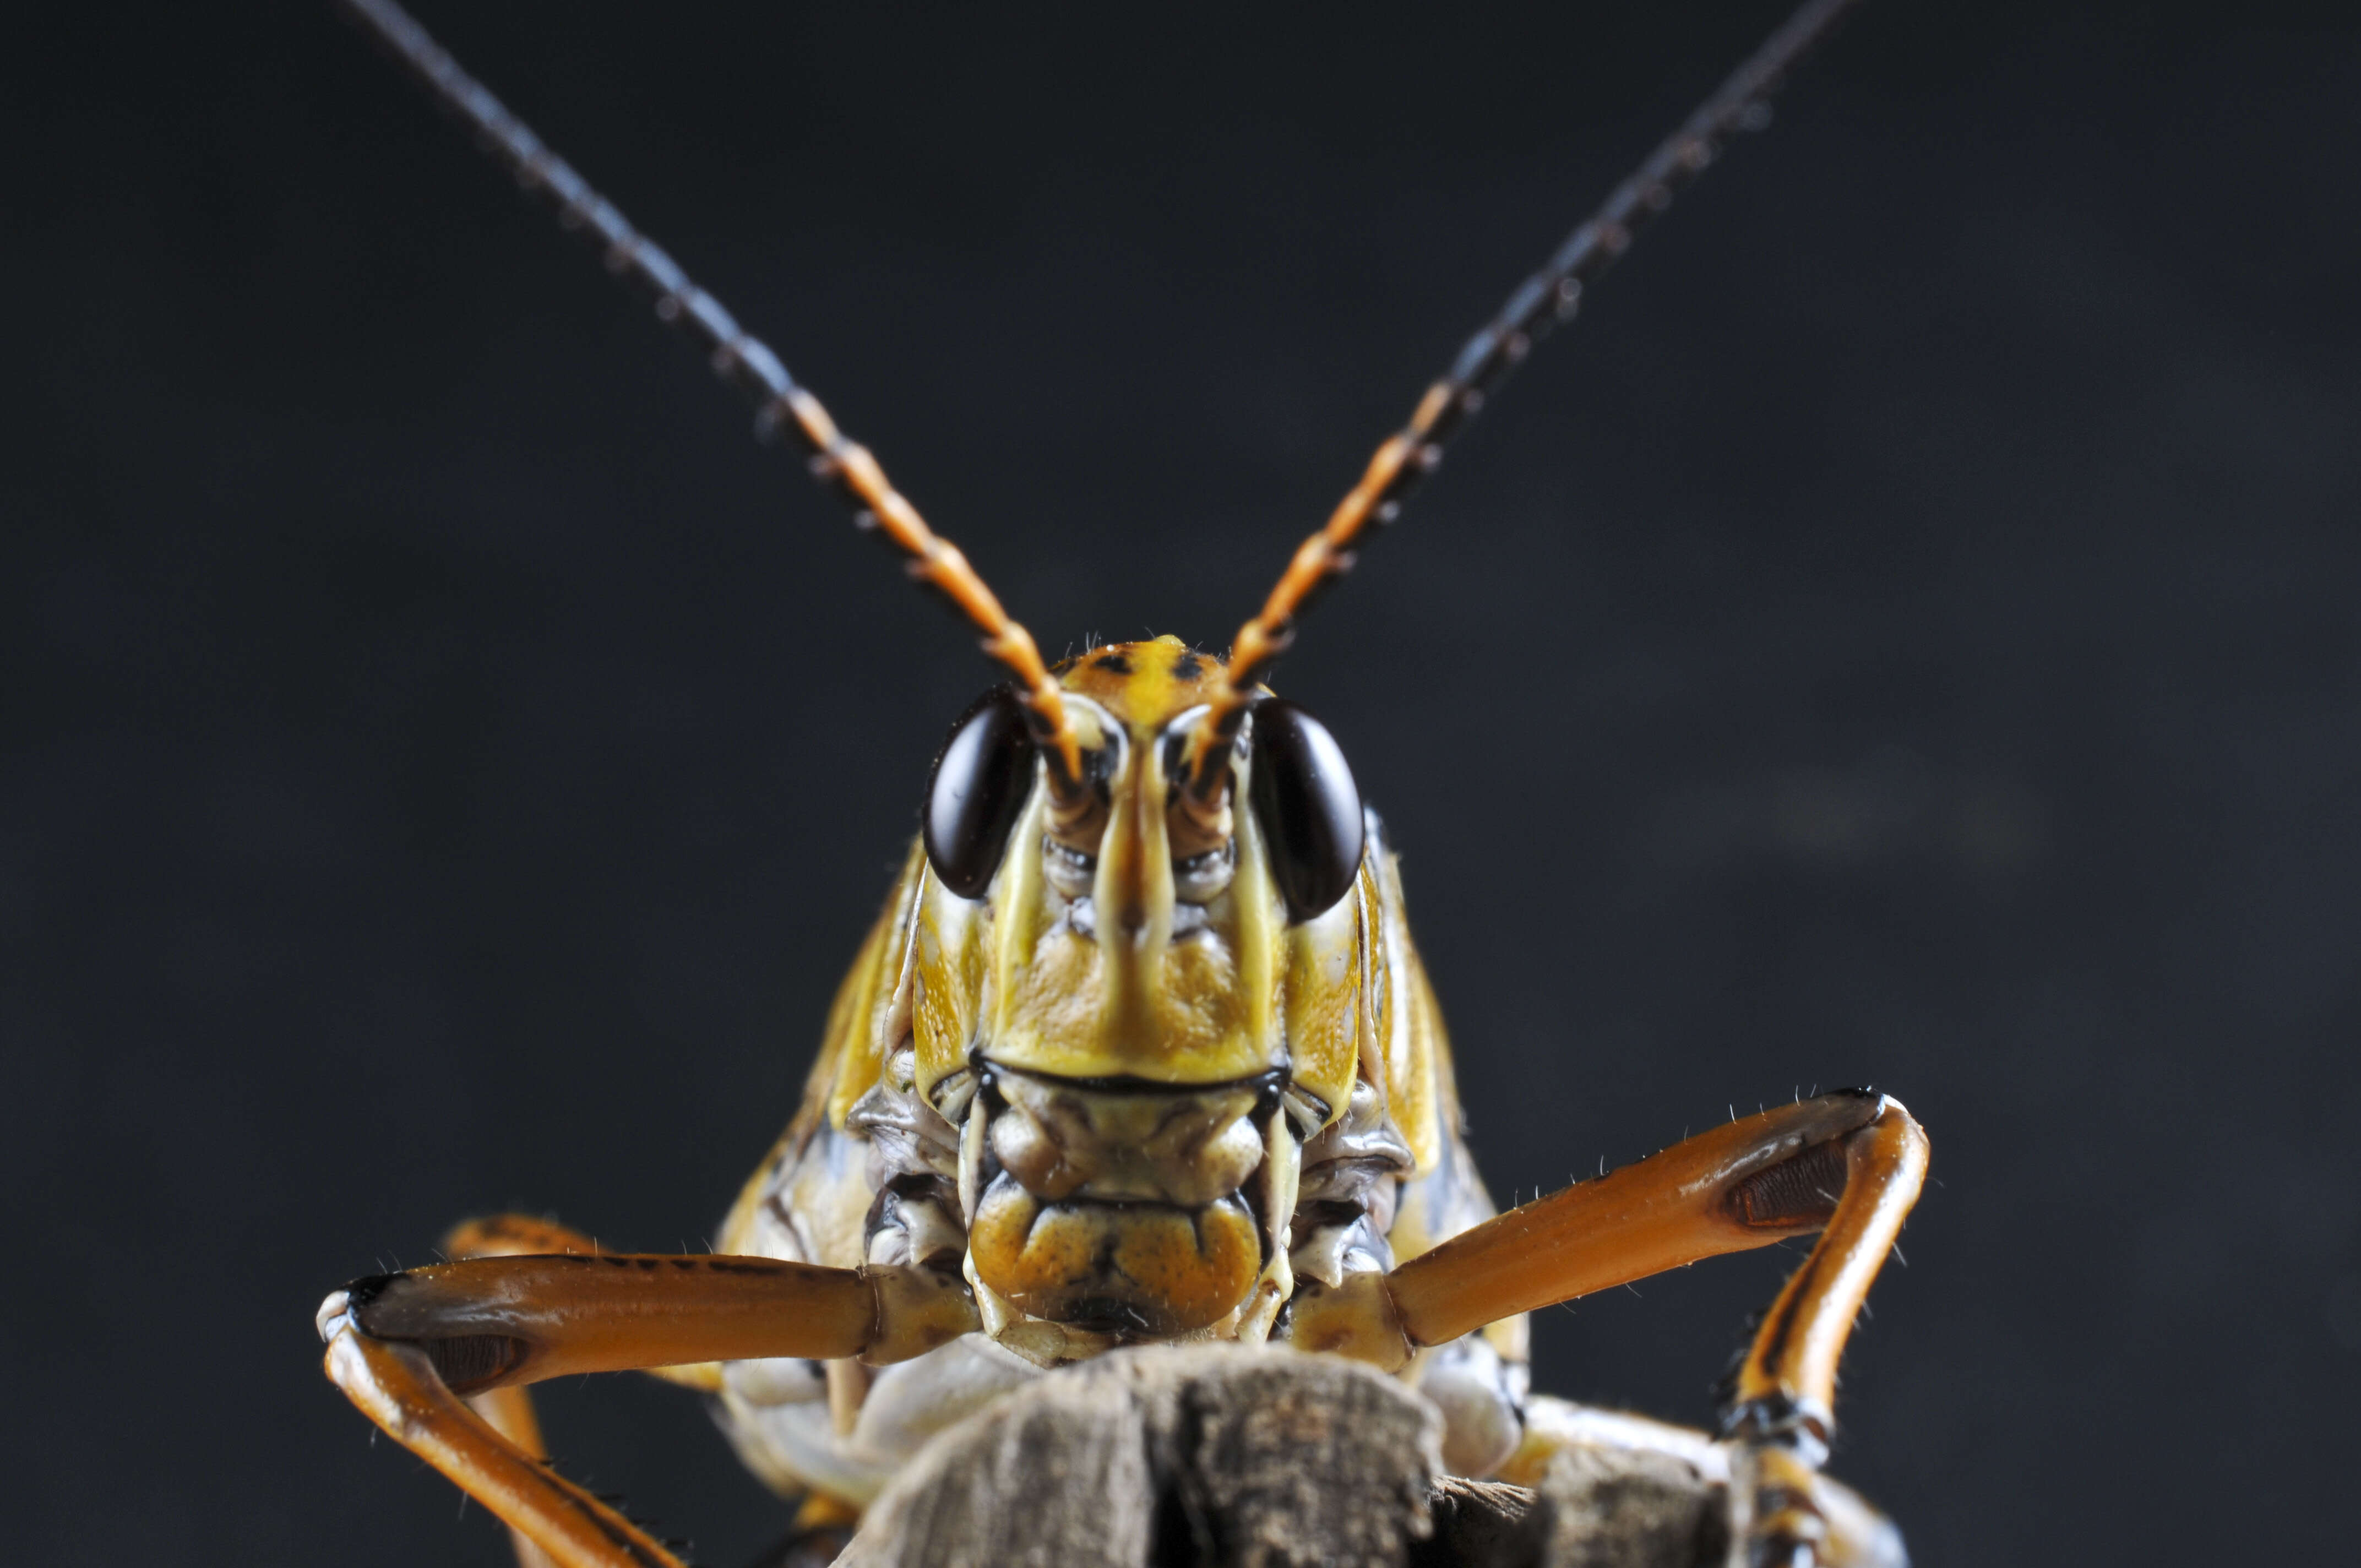 Image of lubber grasshoppers